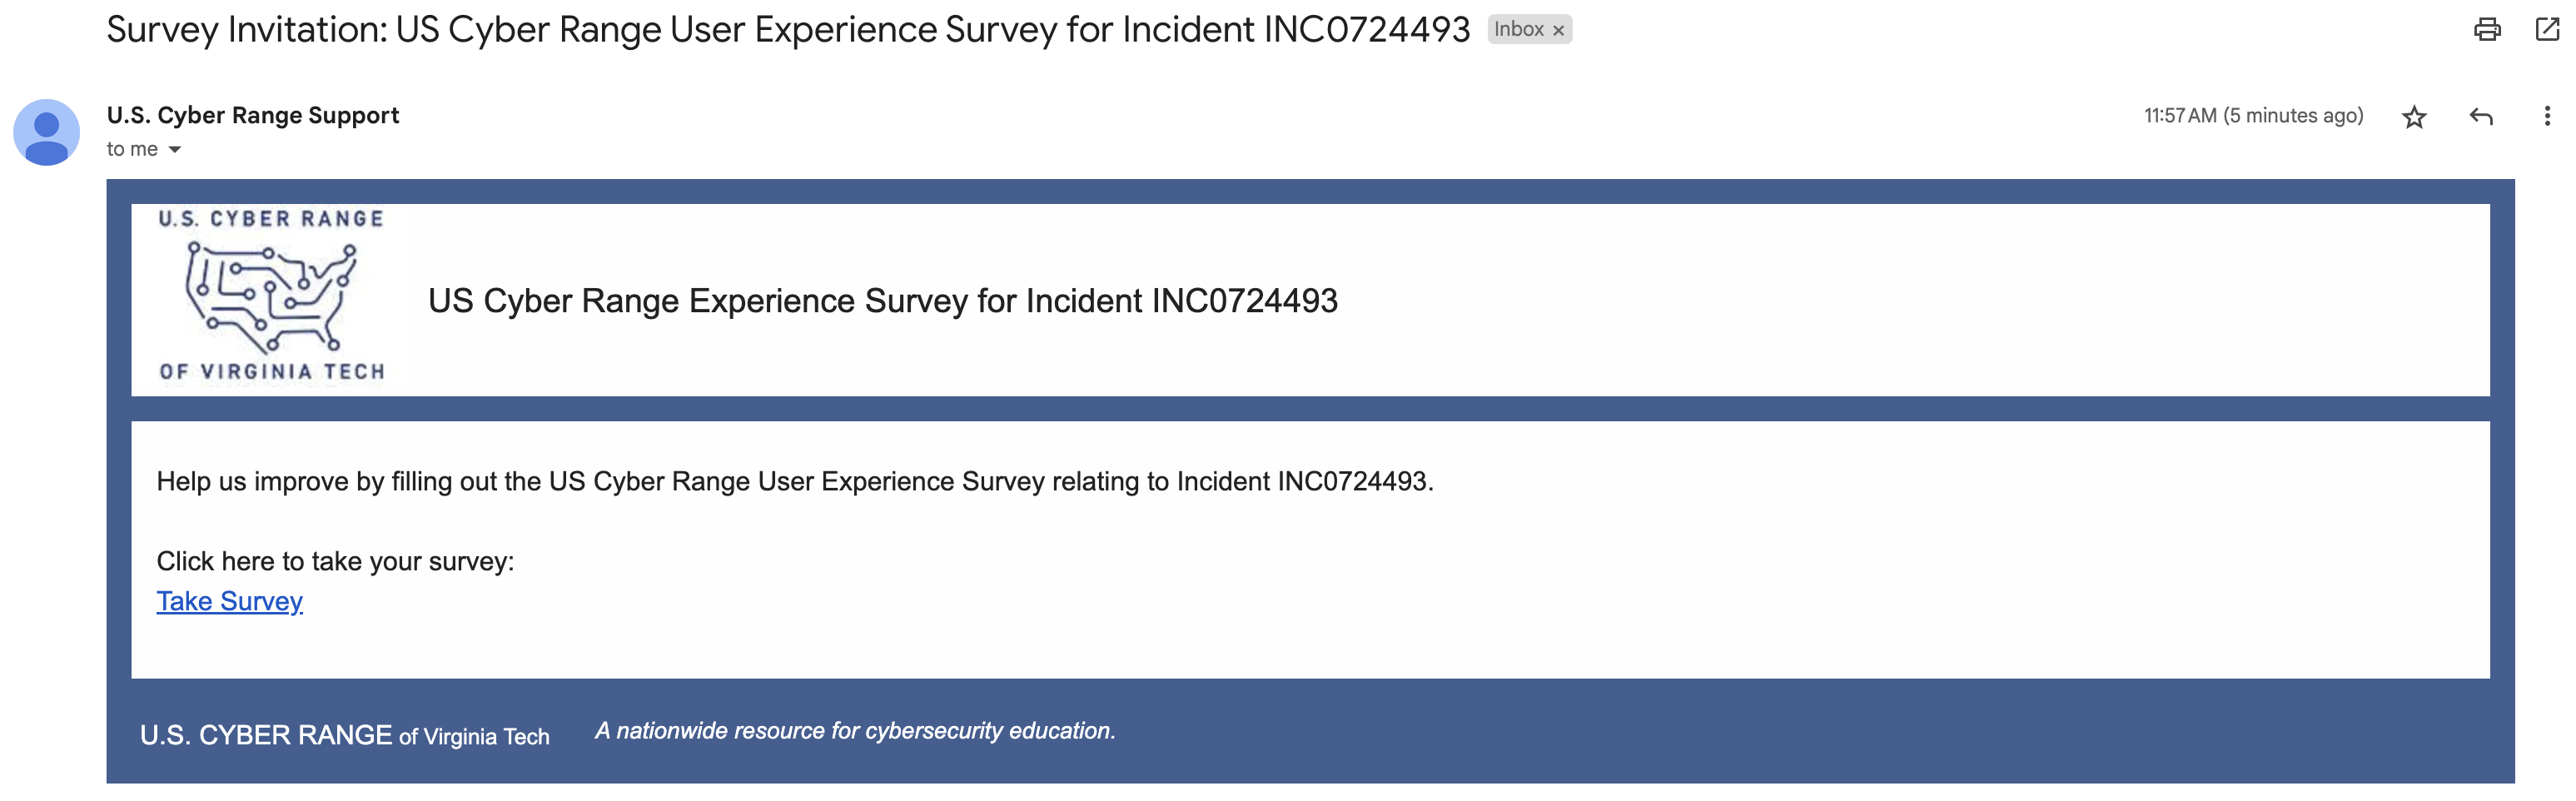 The email will include the incident number that the survey is related to as well as a link to the survey with the text "Take Survey".